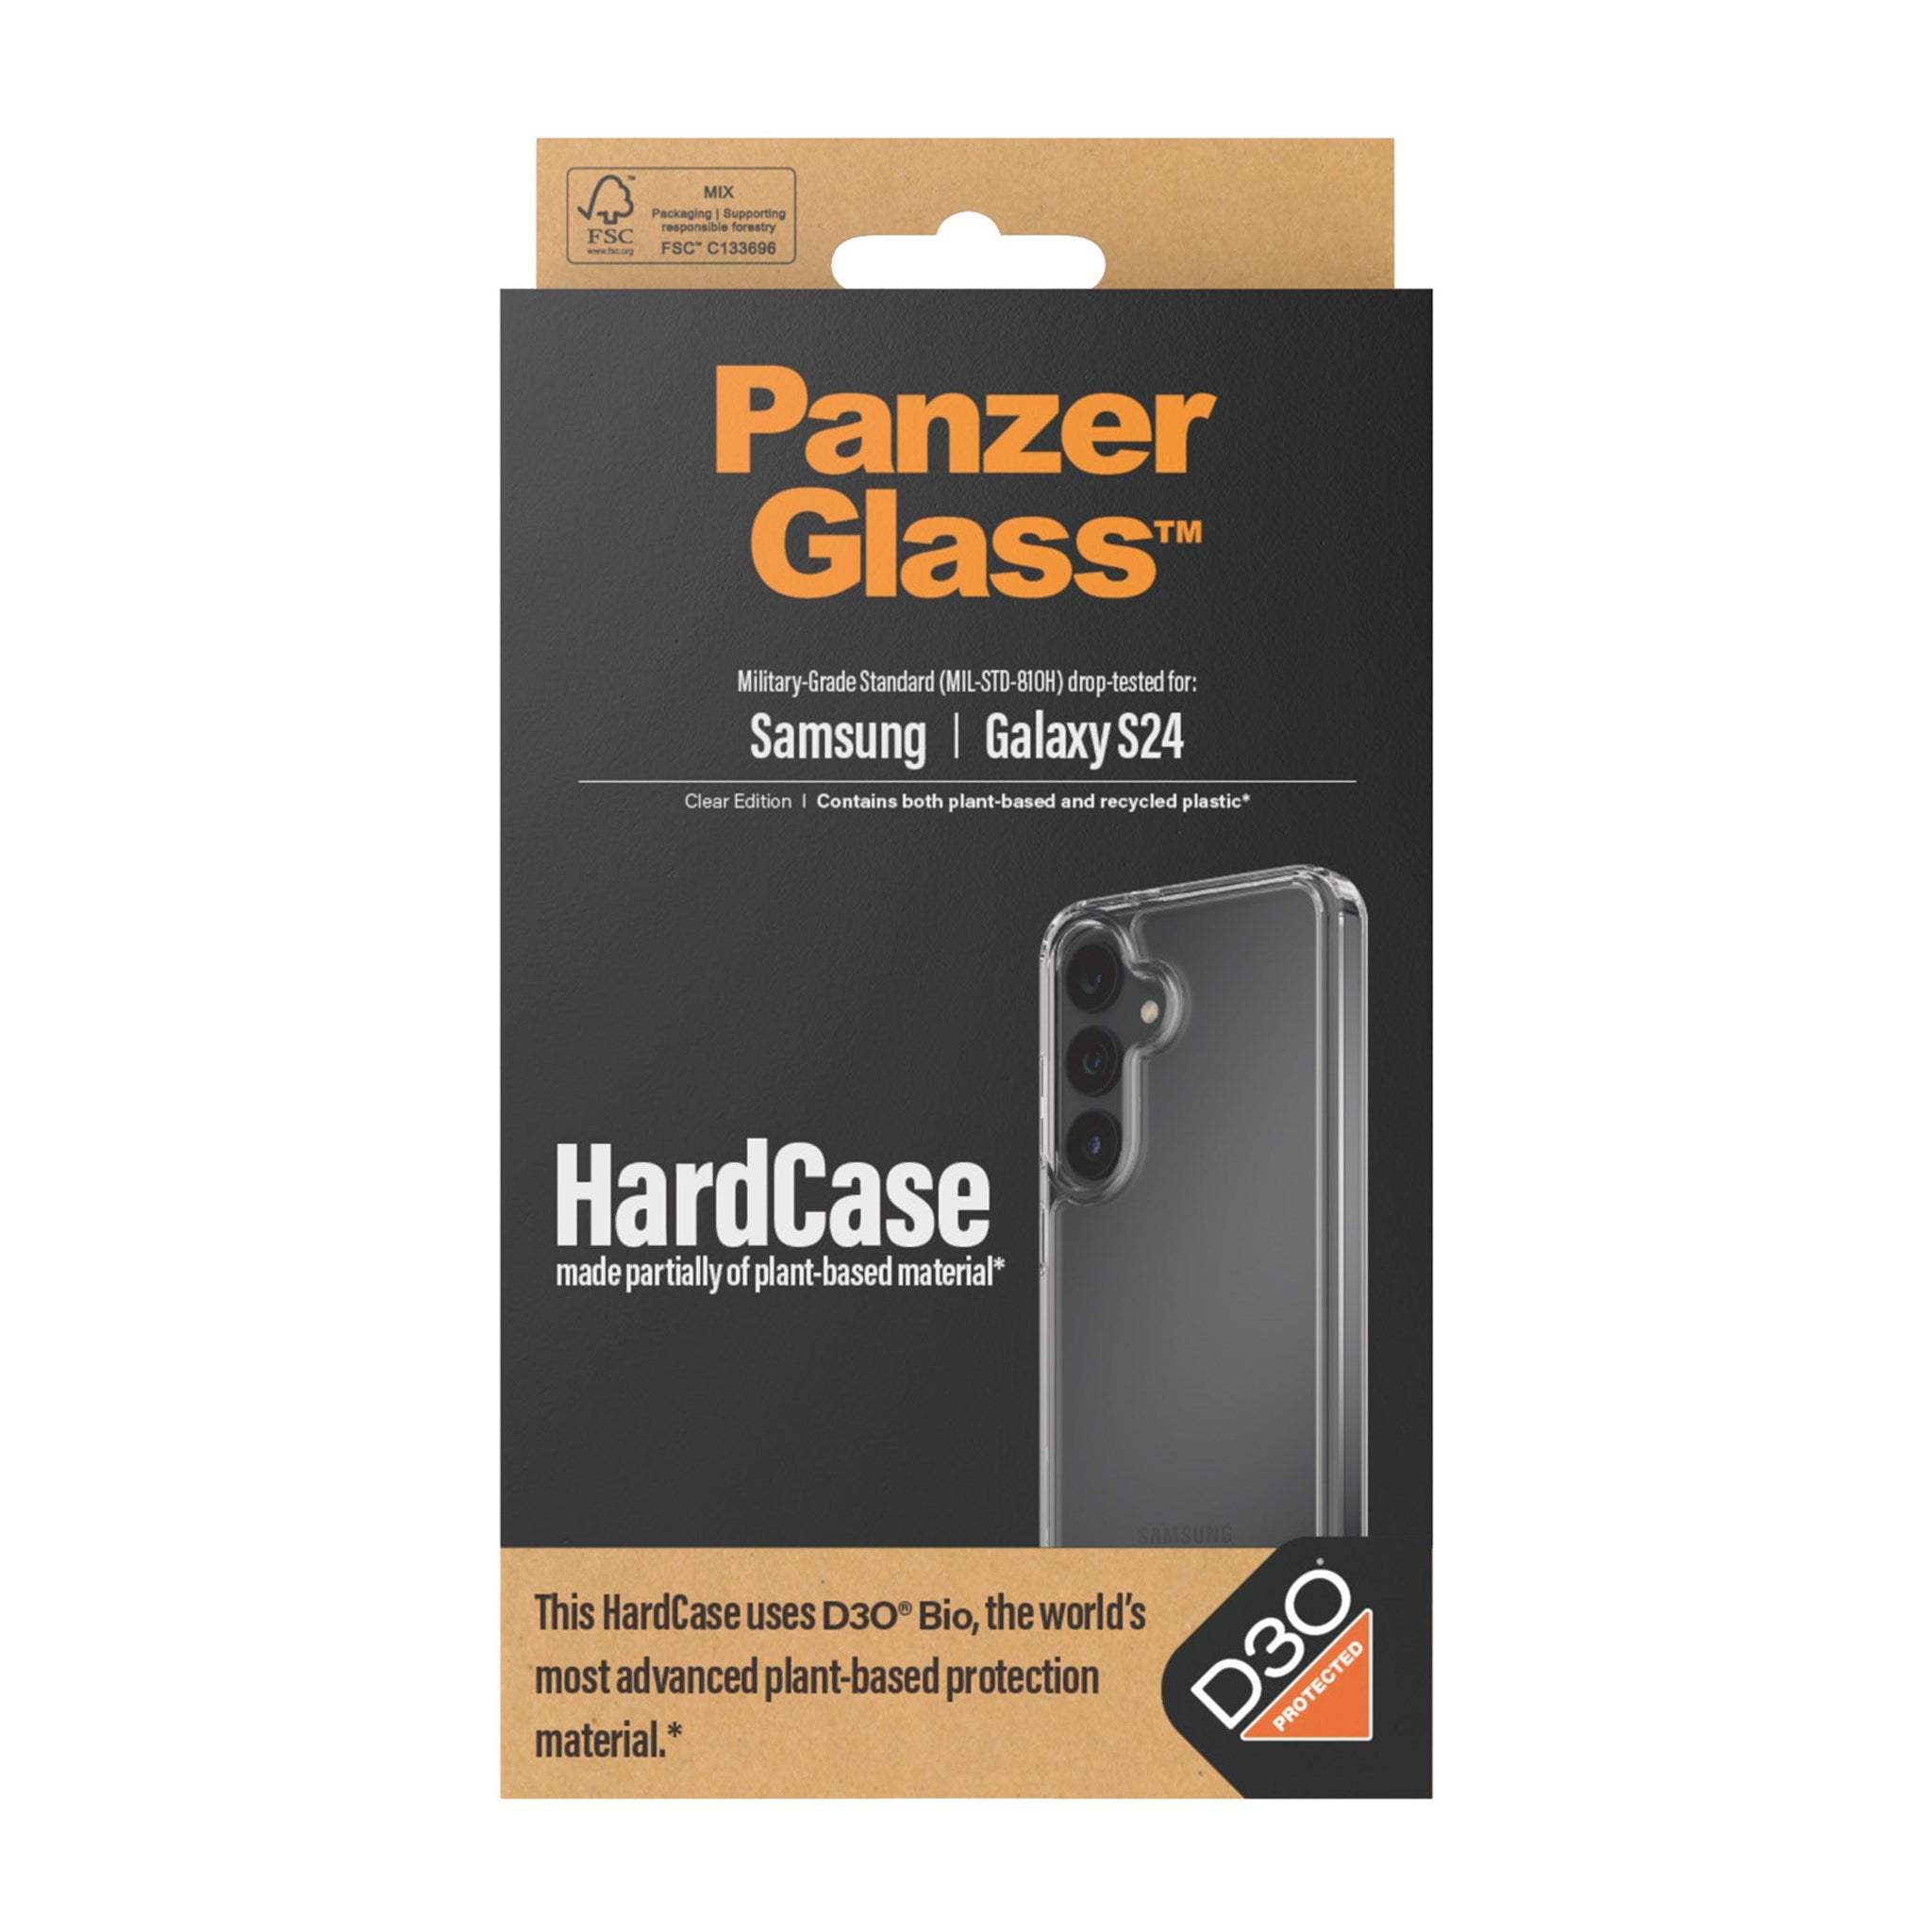 PanzerGlass® HardCase with D3O® Samsung Galaxy S24